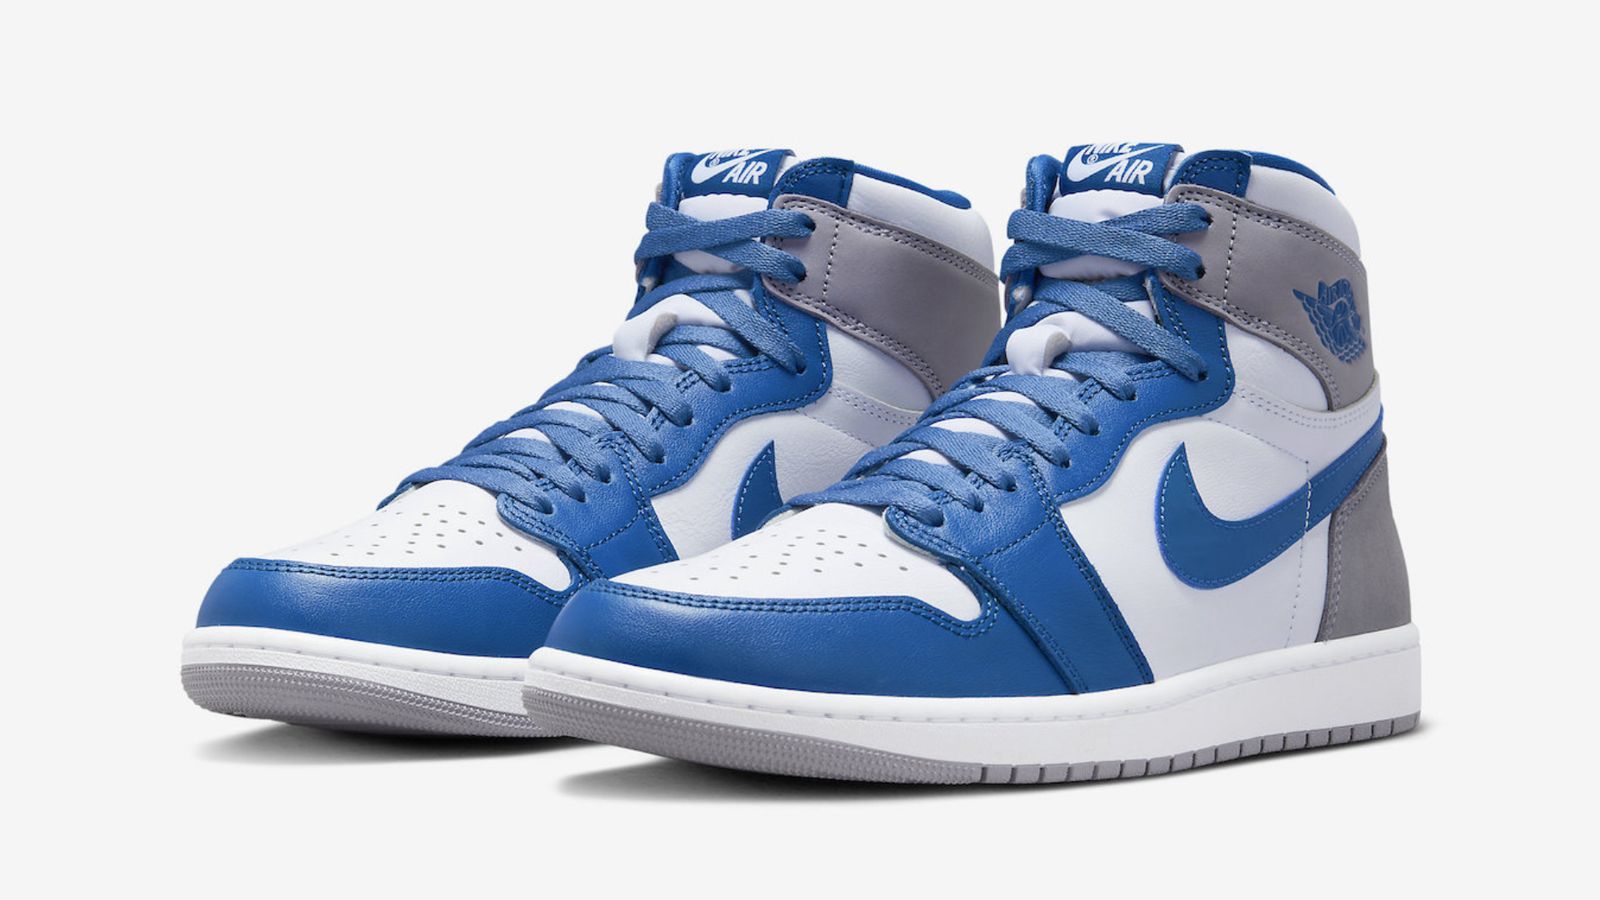 Air Jordan 1 High "True Blue" product image of a white, blue, and grey pair of sneakers.